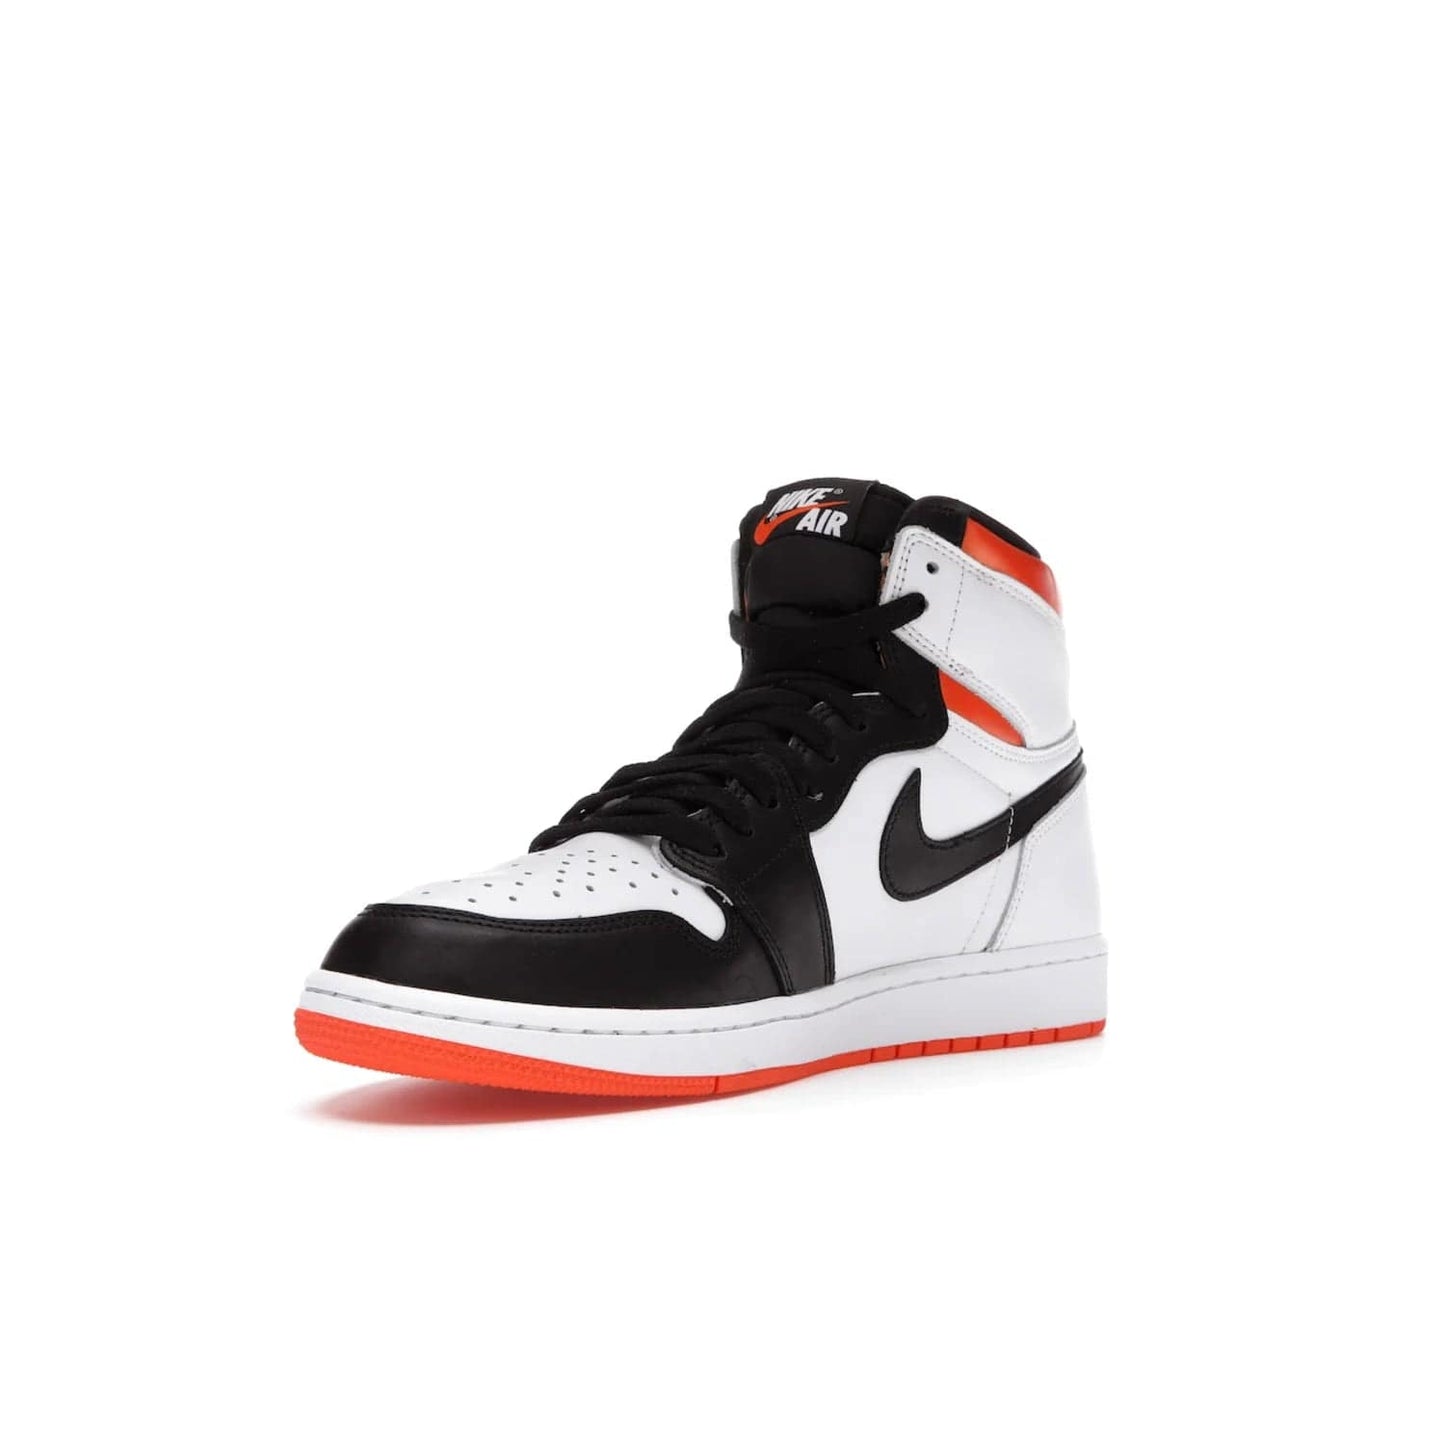 Jordan 1 Retro High Electro Orange - Image 14 - Only at www.BallersClubKickz.com - This Air Jordan 1 Retro High Electro Orange features a white leather upper with black overlays and vibrant Hyper Orange ankle wrap. Turn heads with this iconic design of woven tongue label and sole. Get yours today and add some serious style to your rotation.